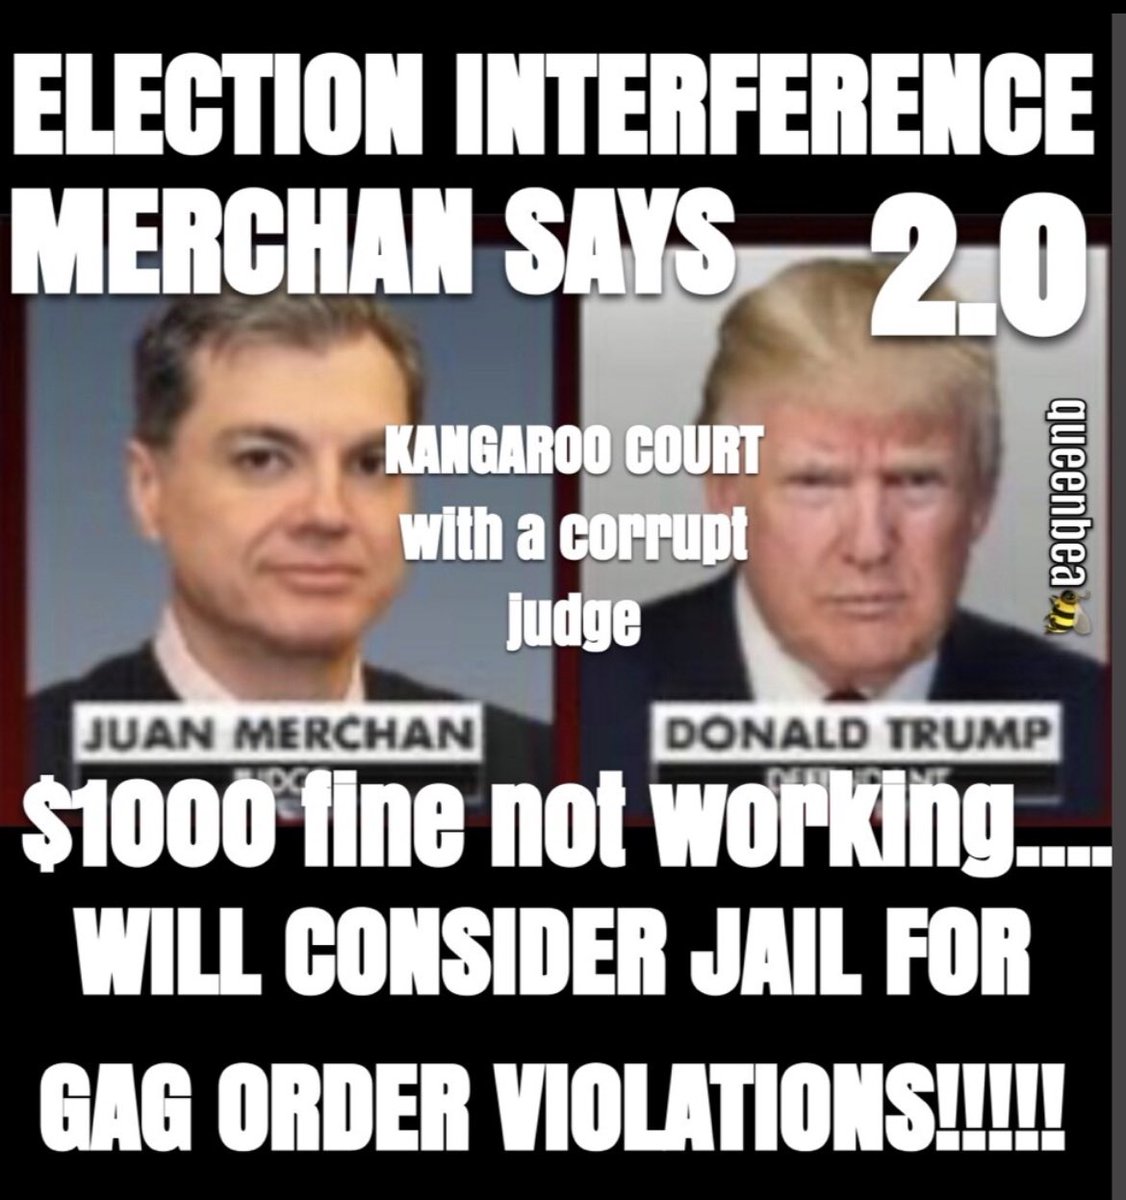 Do you think Merchan would actually jail Trump?